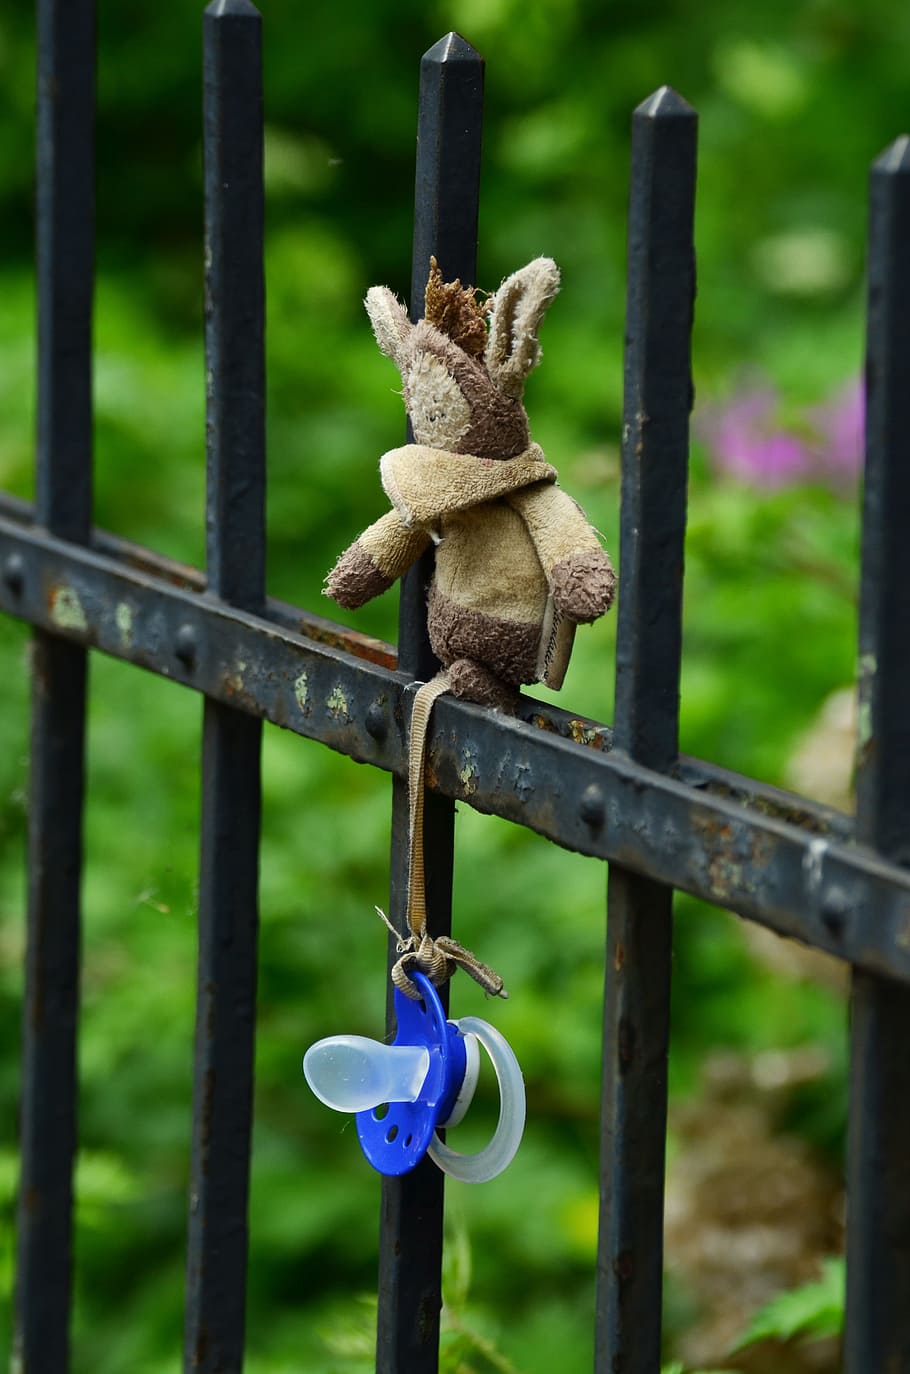 Pacifier, Toys, Lost, Forget, Missing, search, to find, fence, fundsache, reference